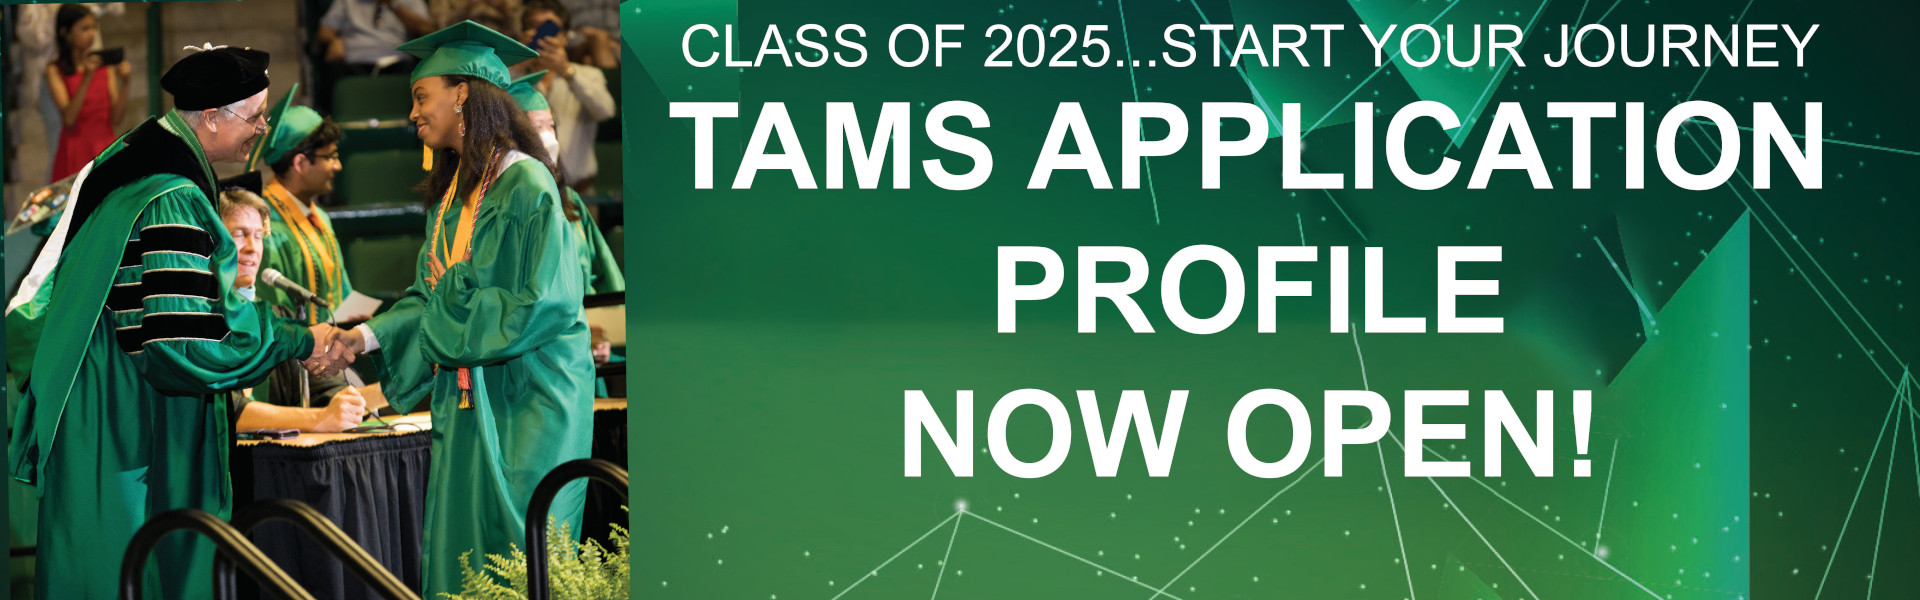 TAMS Class of 2025 Application opens August 1, 2022